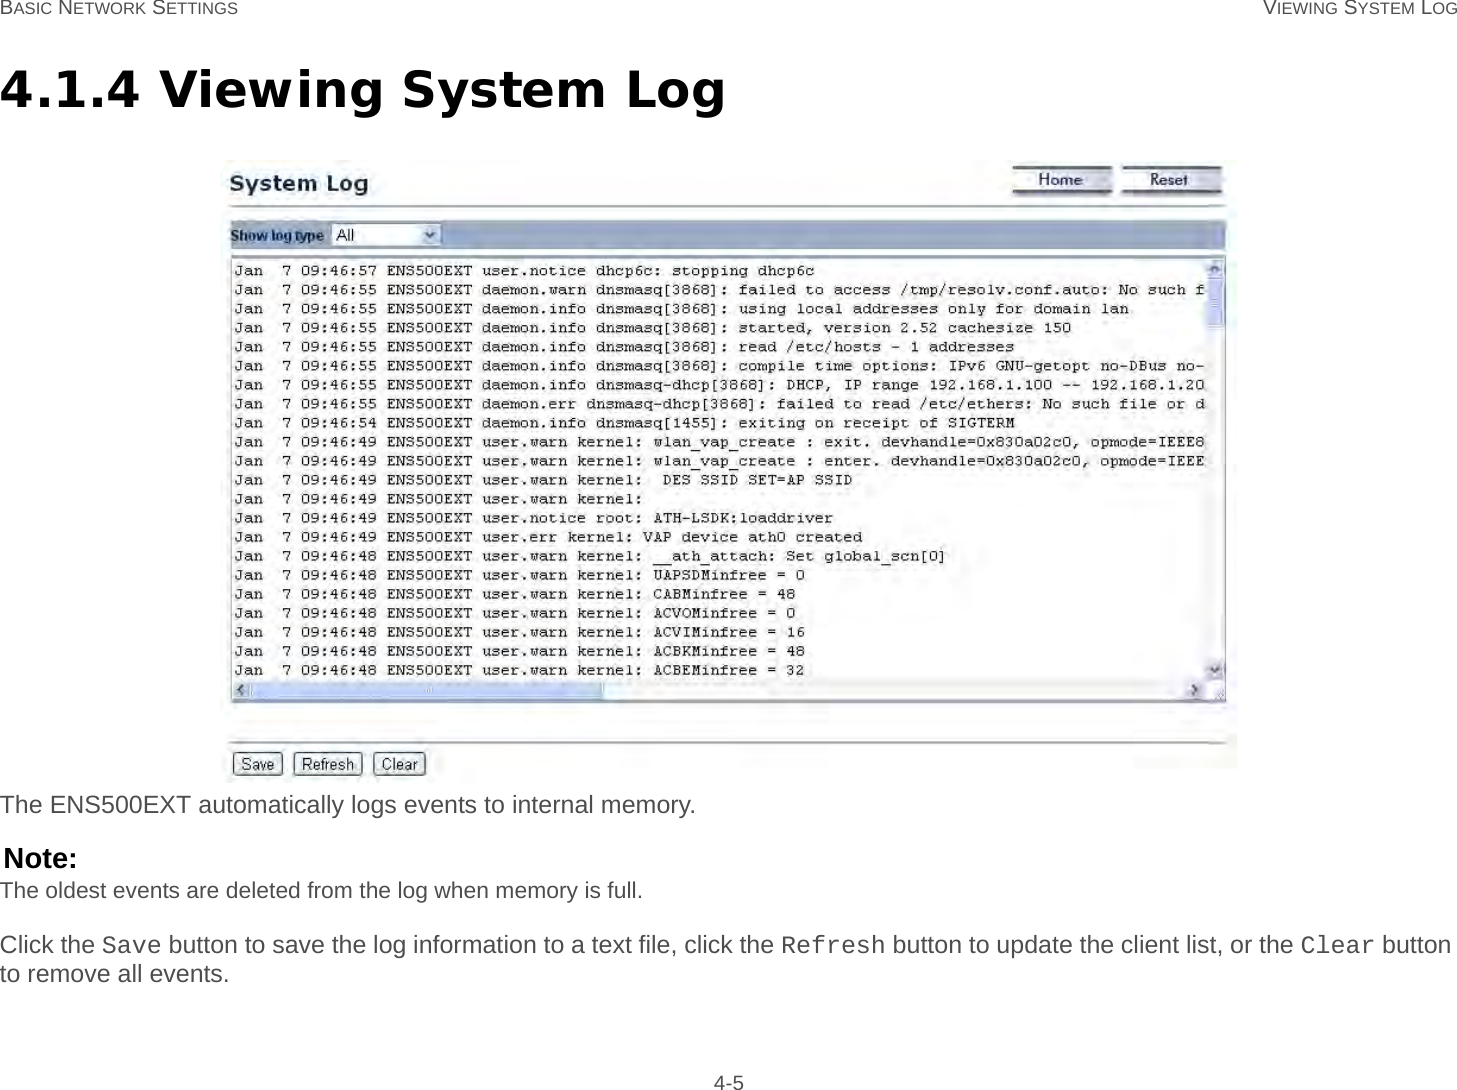 BASIC NETWORK SETTINGS VIEWING SYSTEM LOG 4-54.1.4 Viewing System LogThe ENS500EXT automatically logs events to internal memory.Note:The oldest events are deleted from the log when memory is full.Click the Save button to save the log information to a text file, click the Refresh button to update the client list, or the Clear button to remove all events.